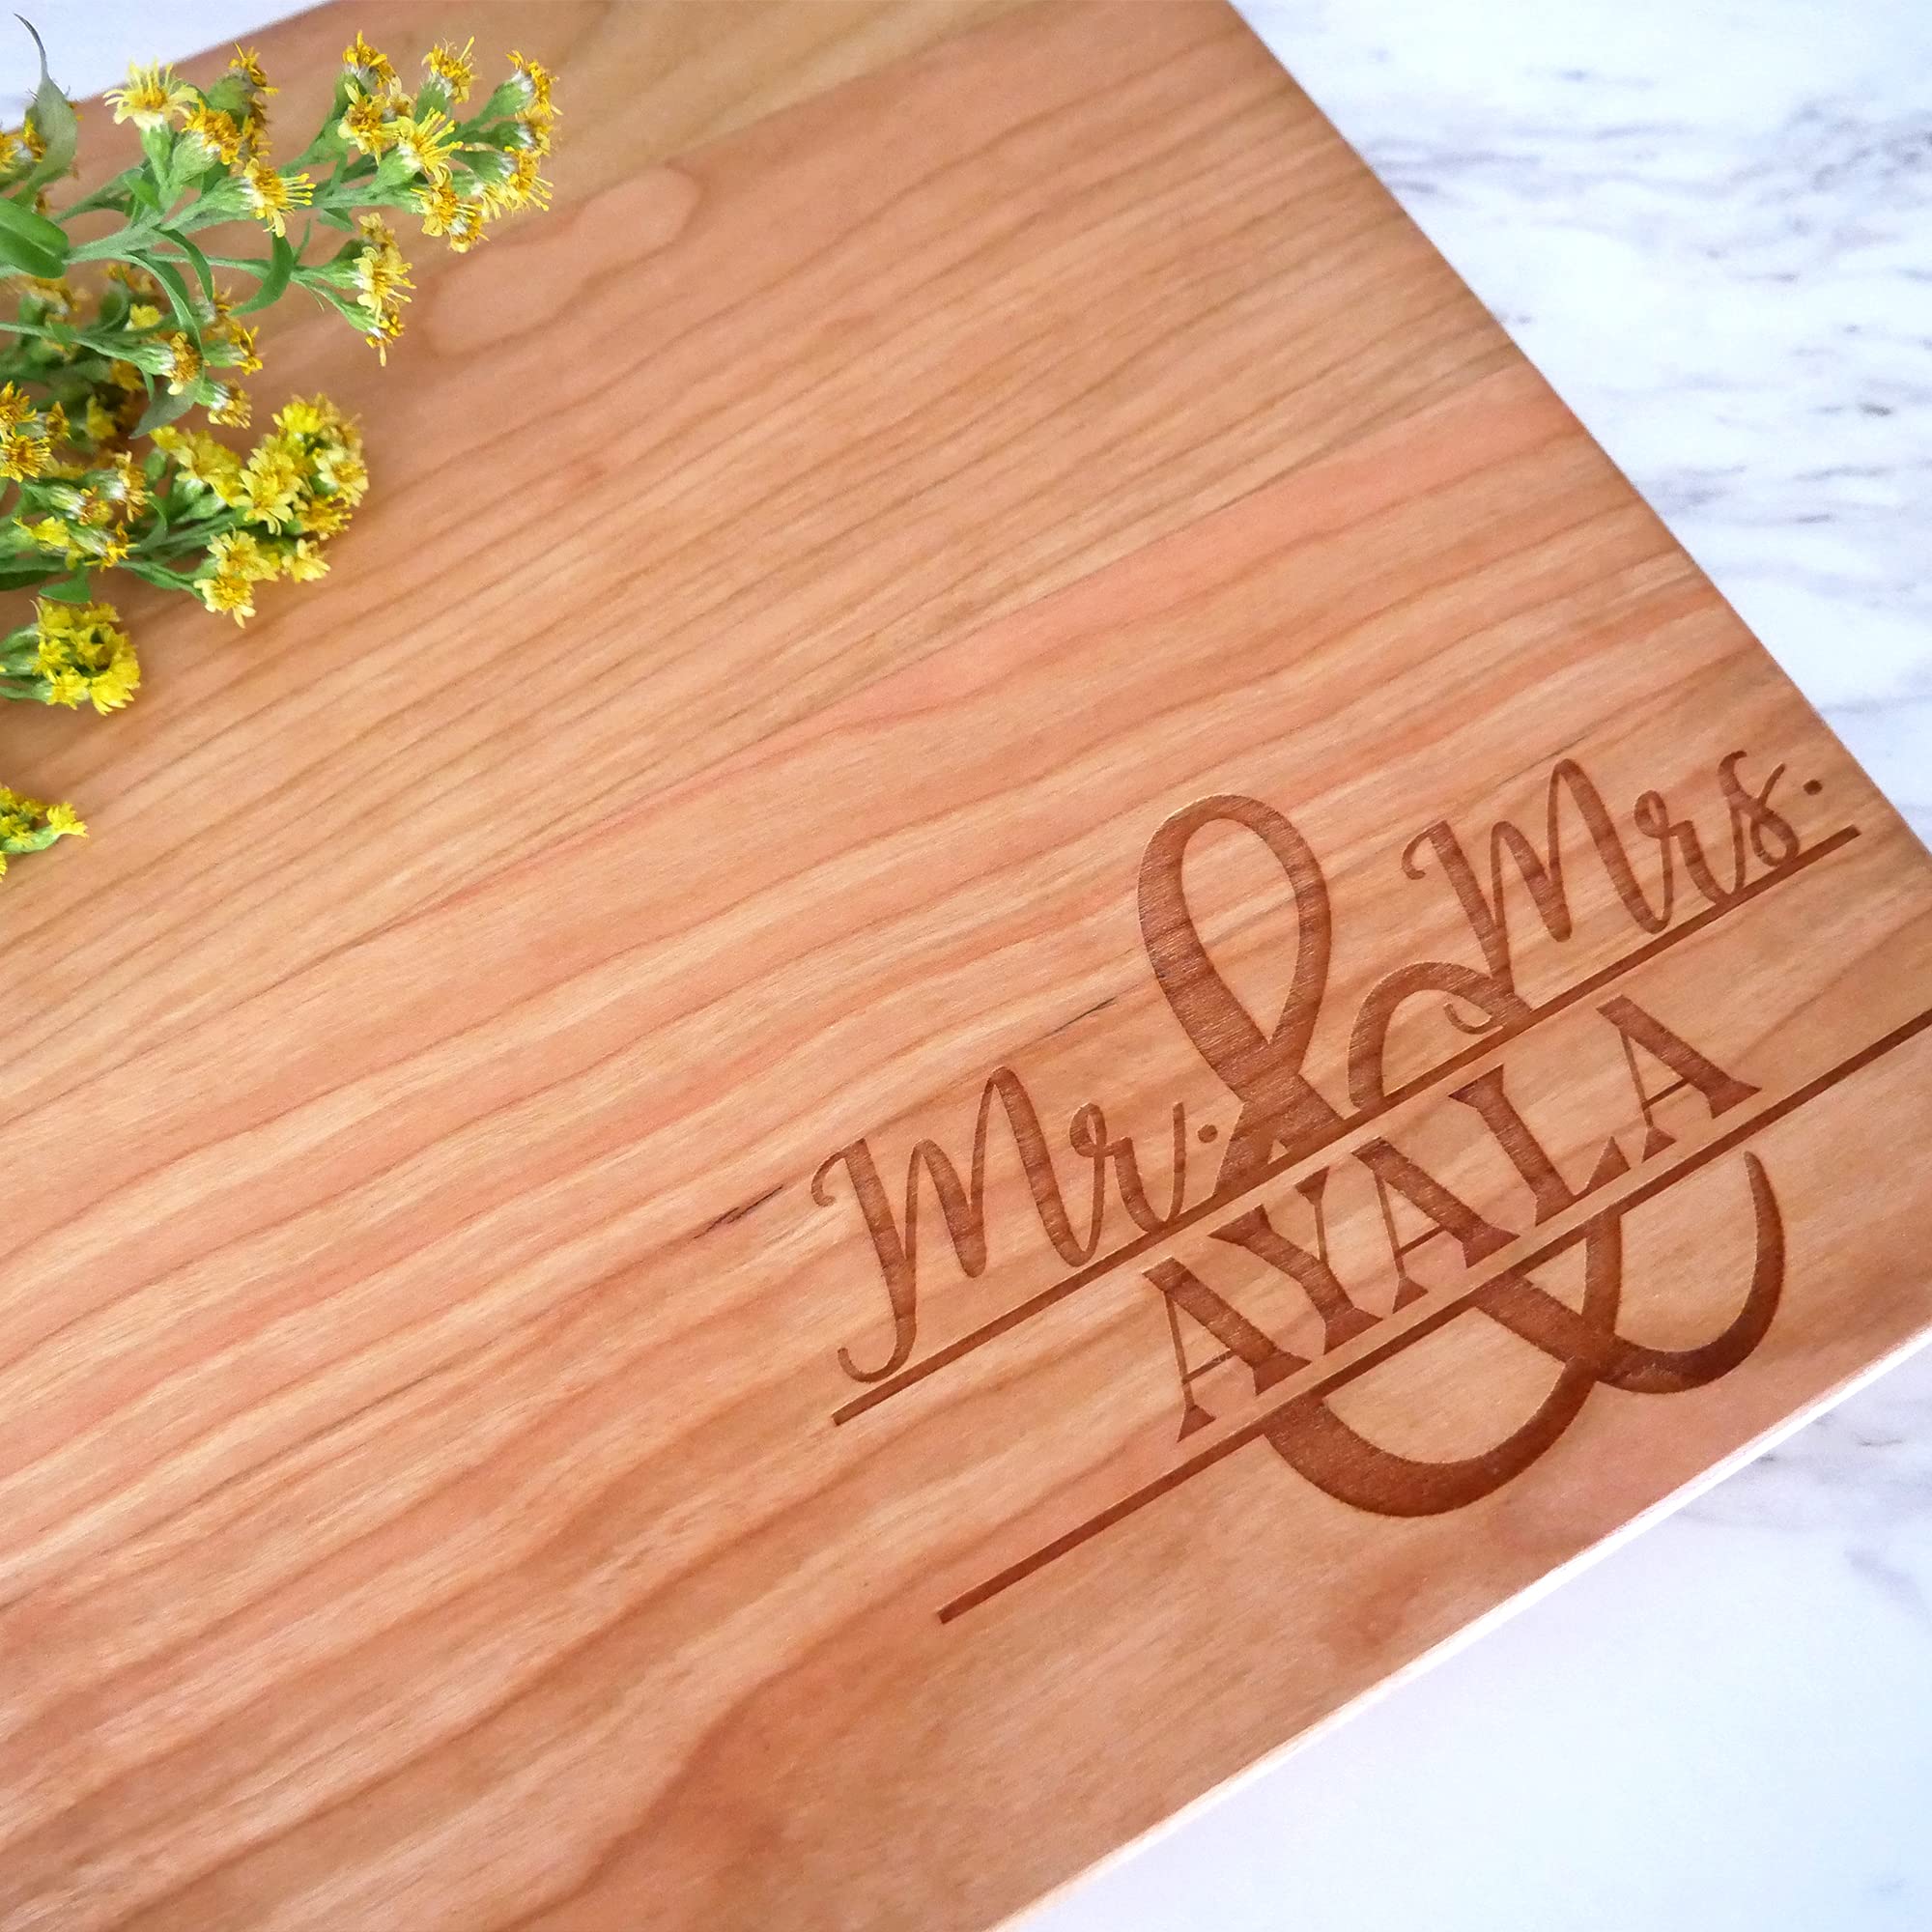 Wedding Gifts for Couple - Personalized Cutting Boards Unique Wedding Gifts Bride & Groom - Thoughtful Wedding Gifts Engraved Cutting Boards - Personalized Wedding Gift - Custom Cutting Board